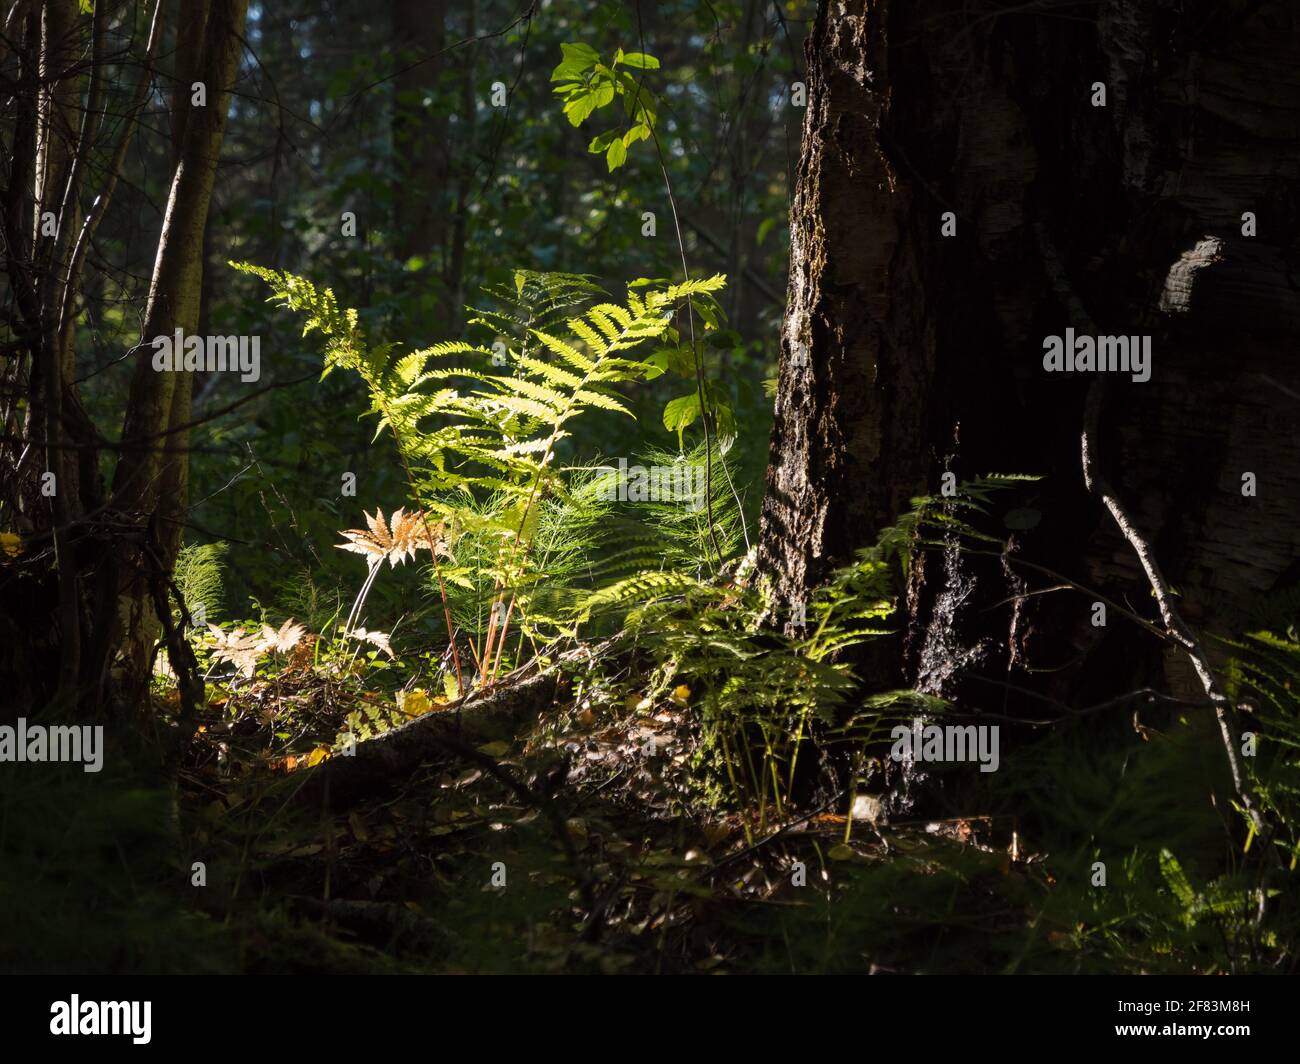 Lady fern growing by old tree in deciduous forest Stock Photo